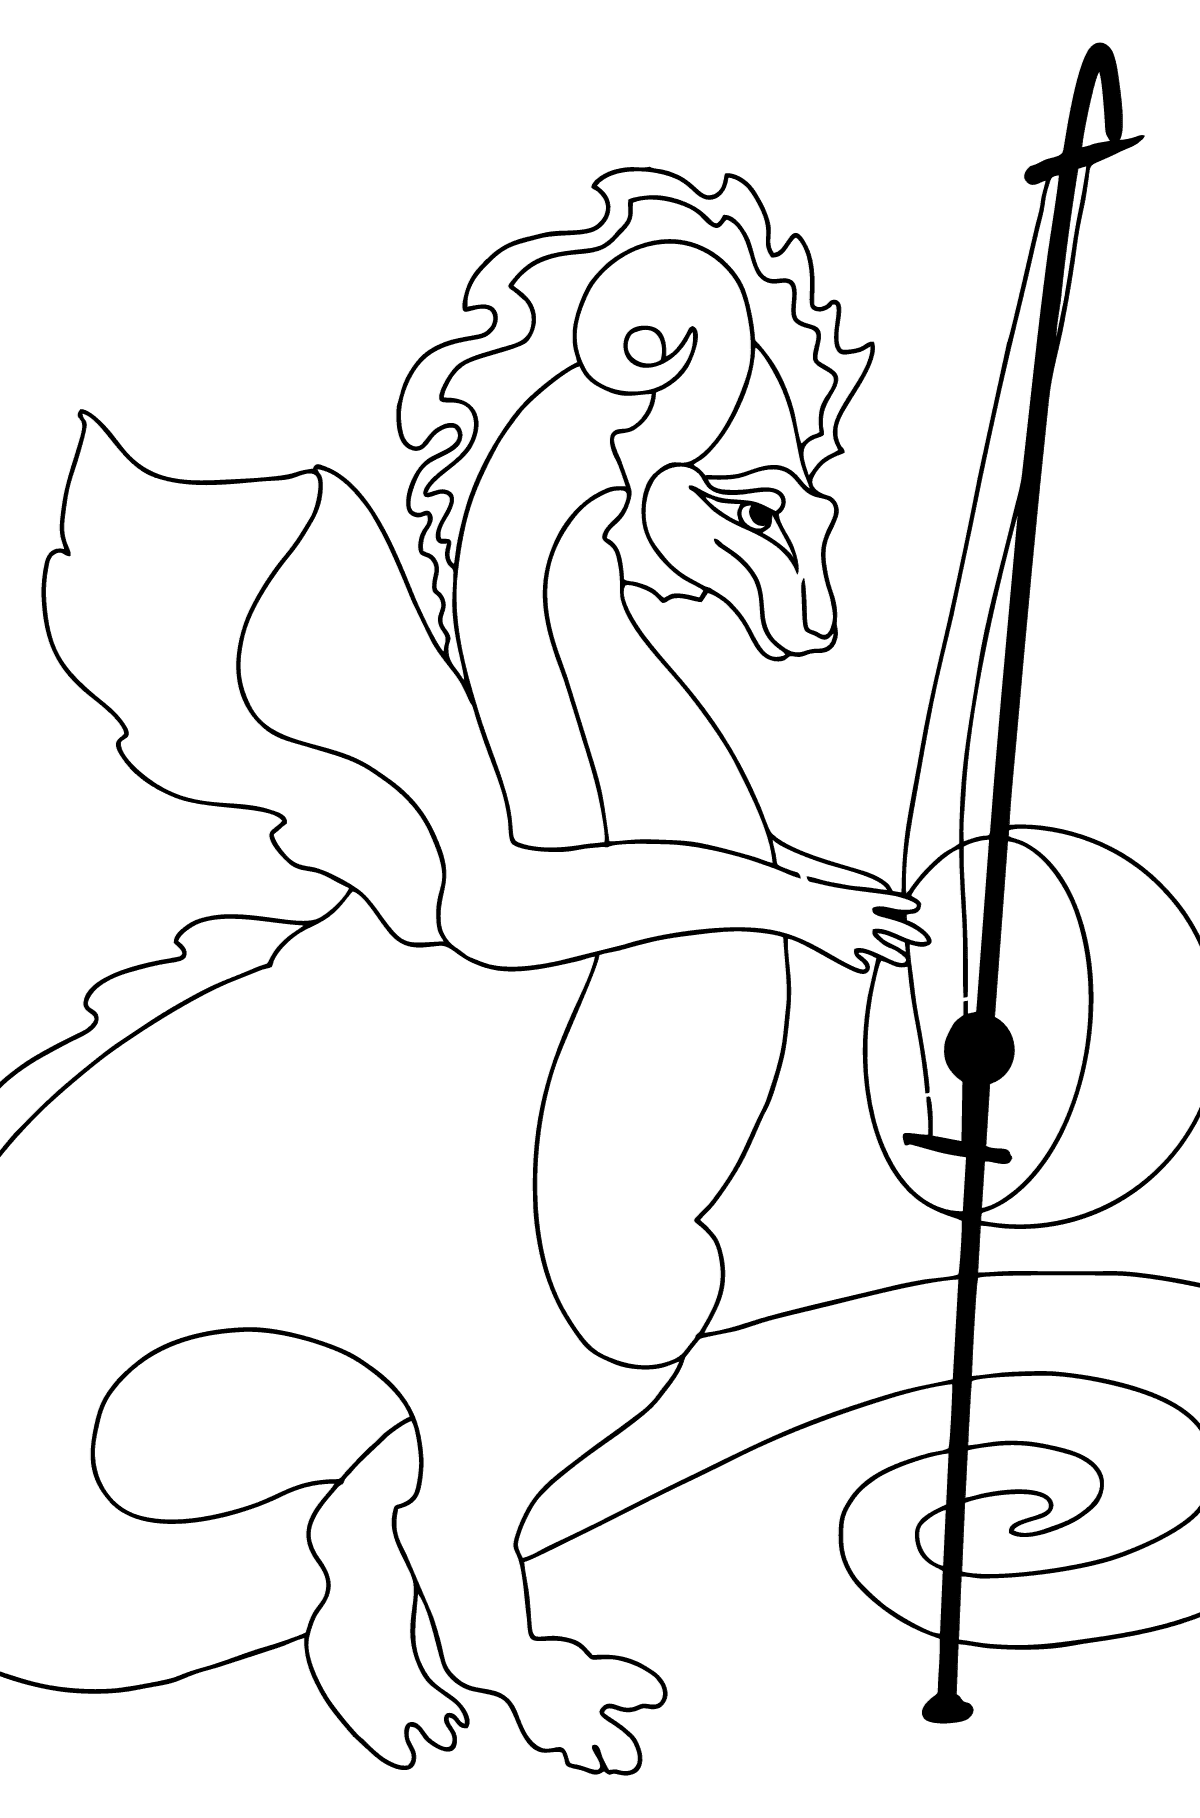 Musical Dragon Coloring Page - Coloring Pages for Kids